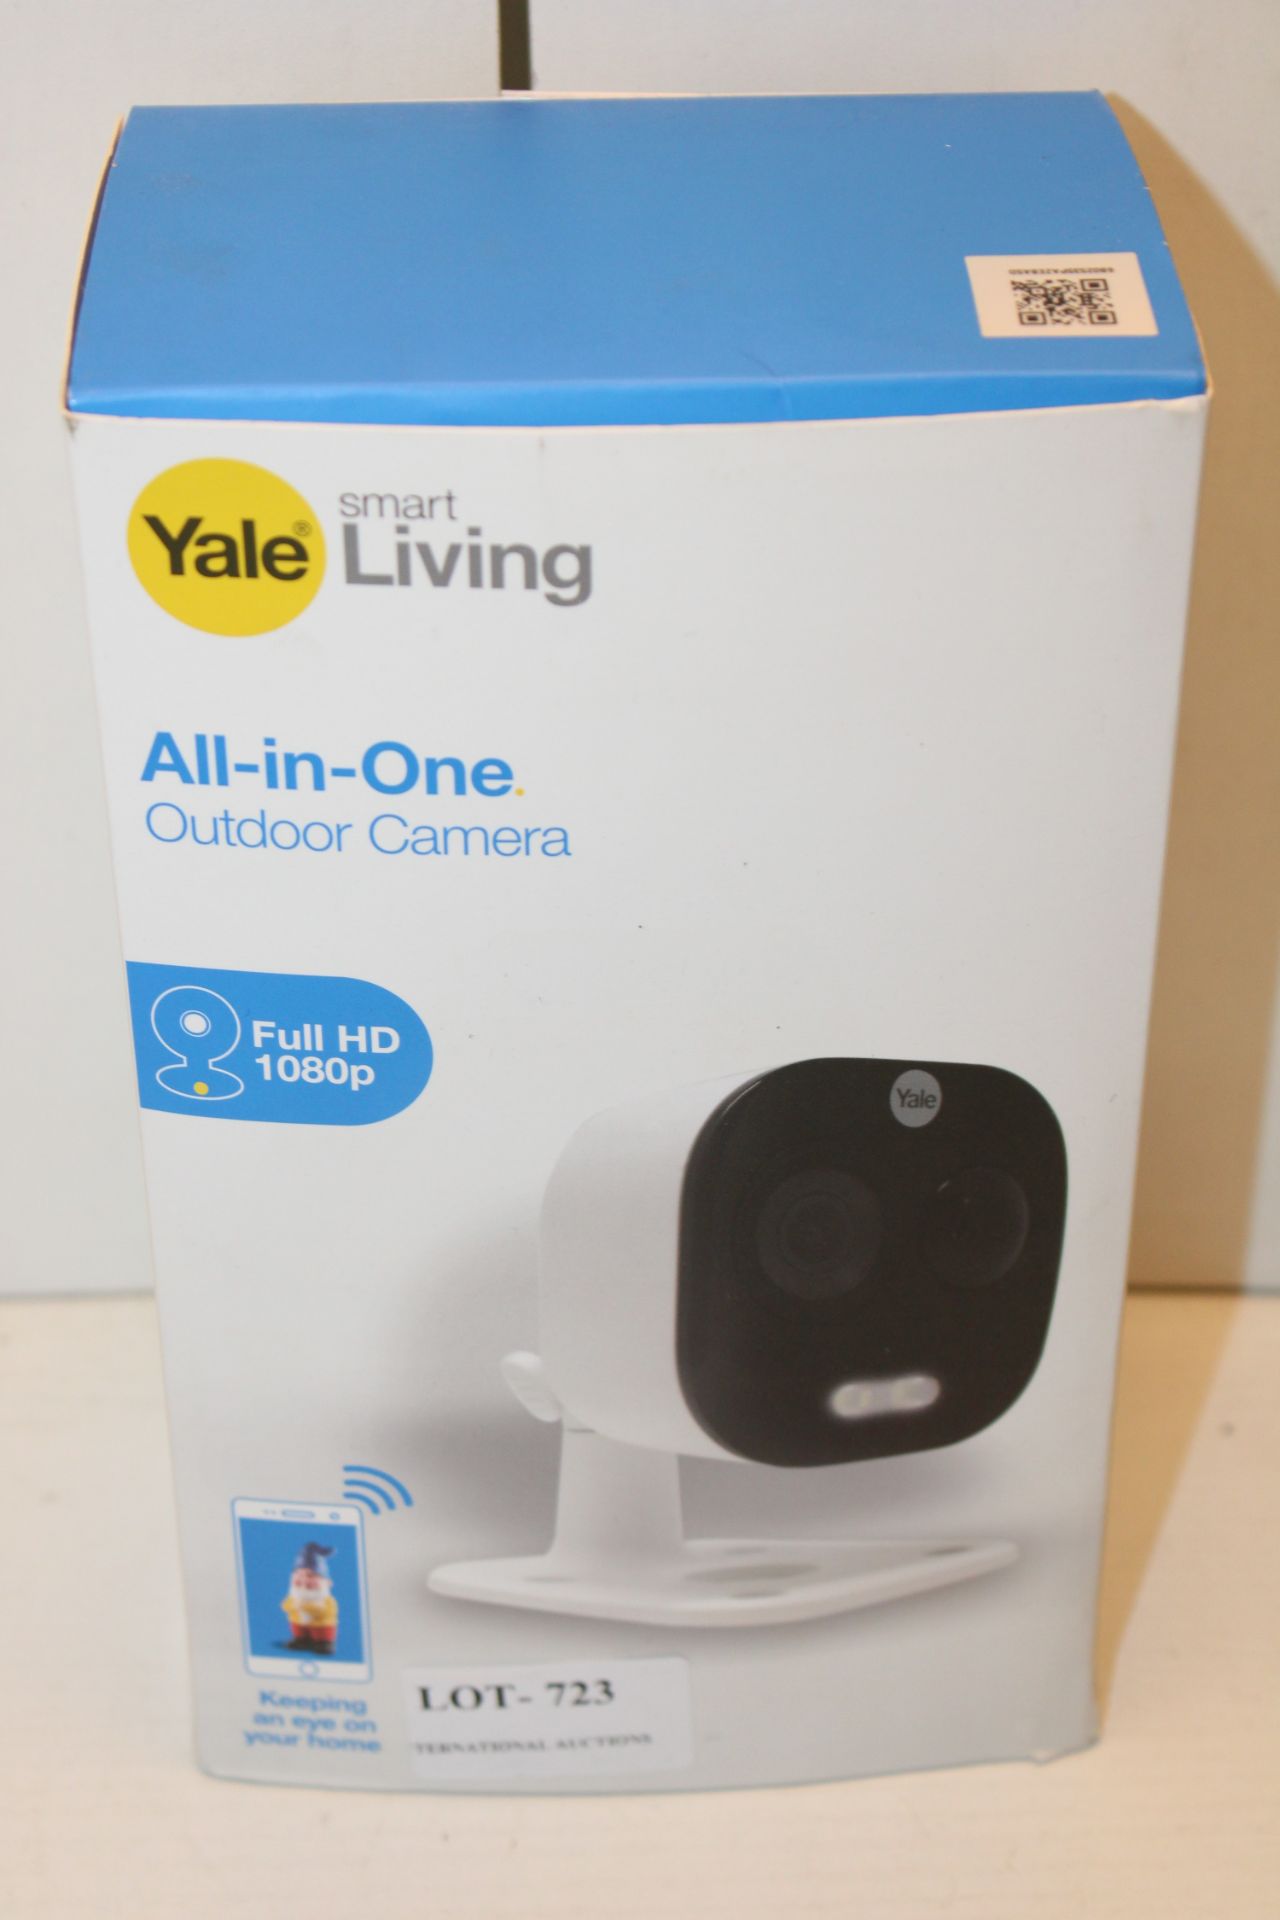 BOXED YALE SMART LIVING ALL-IN-ONE OUTDOOR CAMERA FULL HD 1080P RRP £98.04Condition